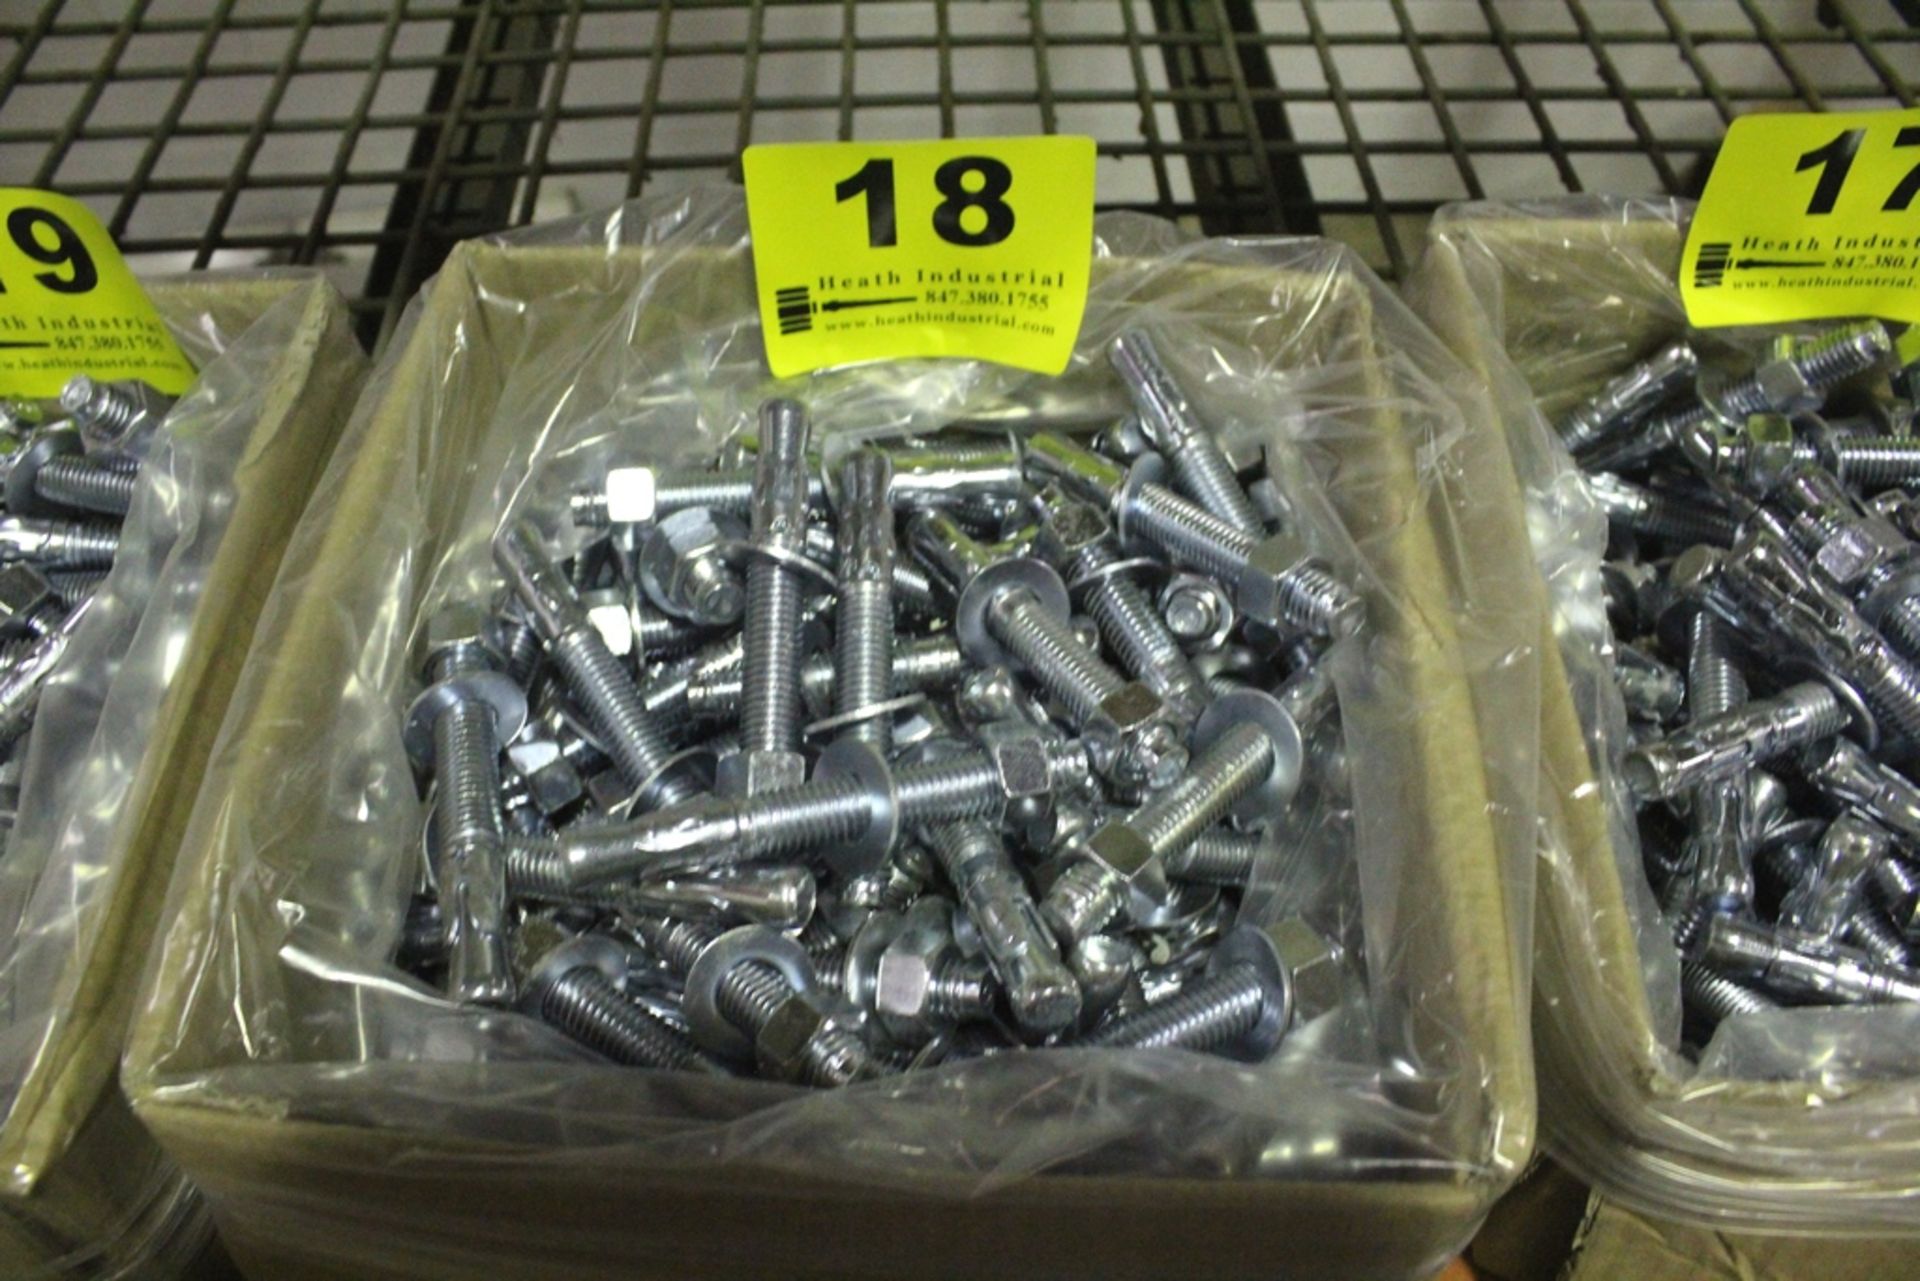 LARGE BOX OF POWERSTUD WEDGE ANCHORS, 5/8" X 4-1/2", ZINC PLATED